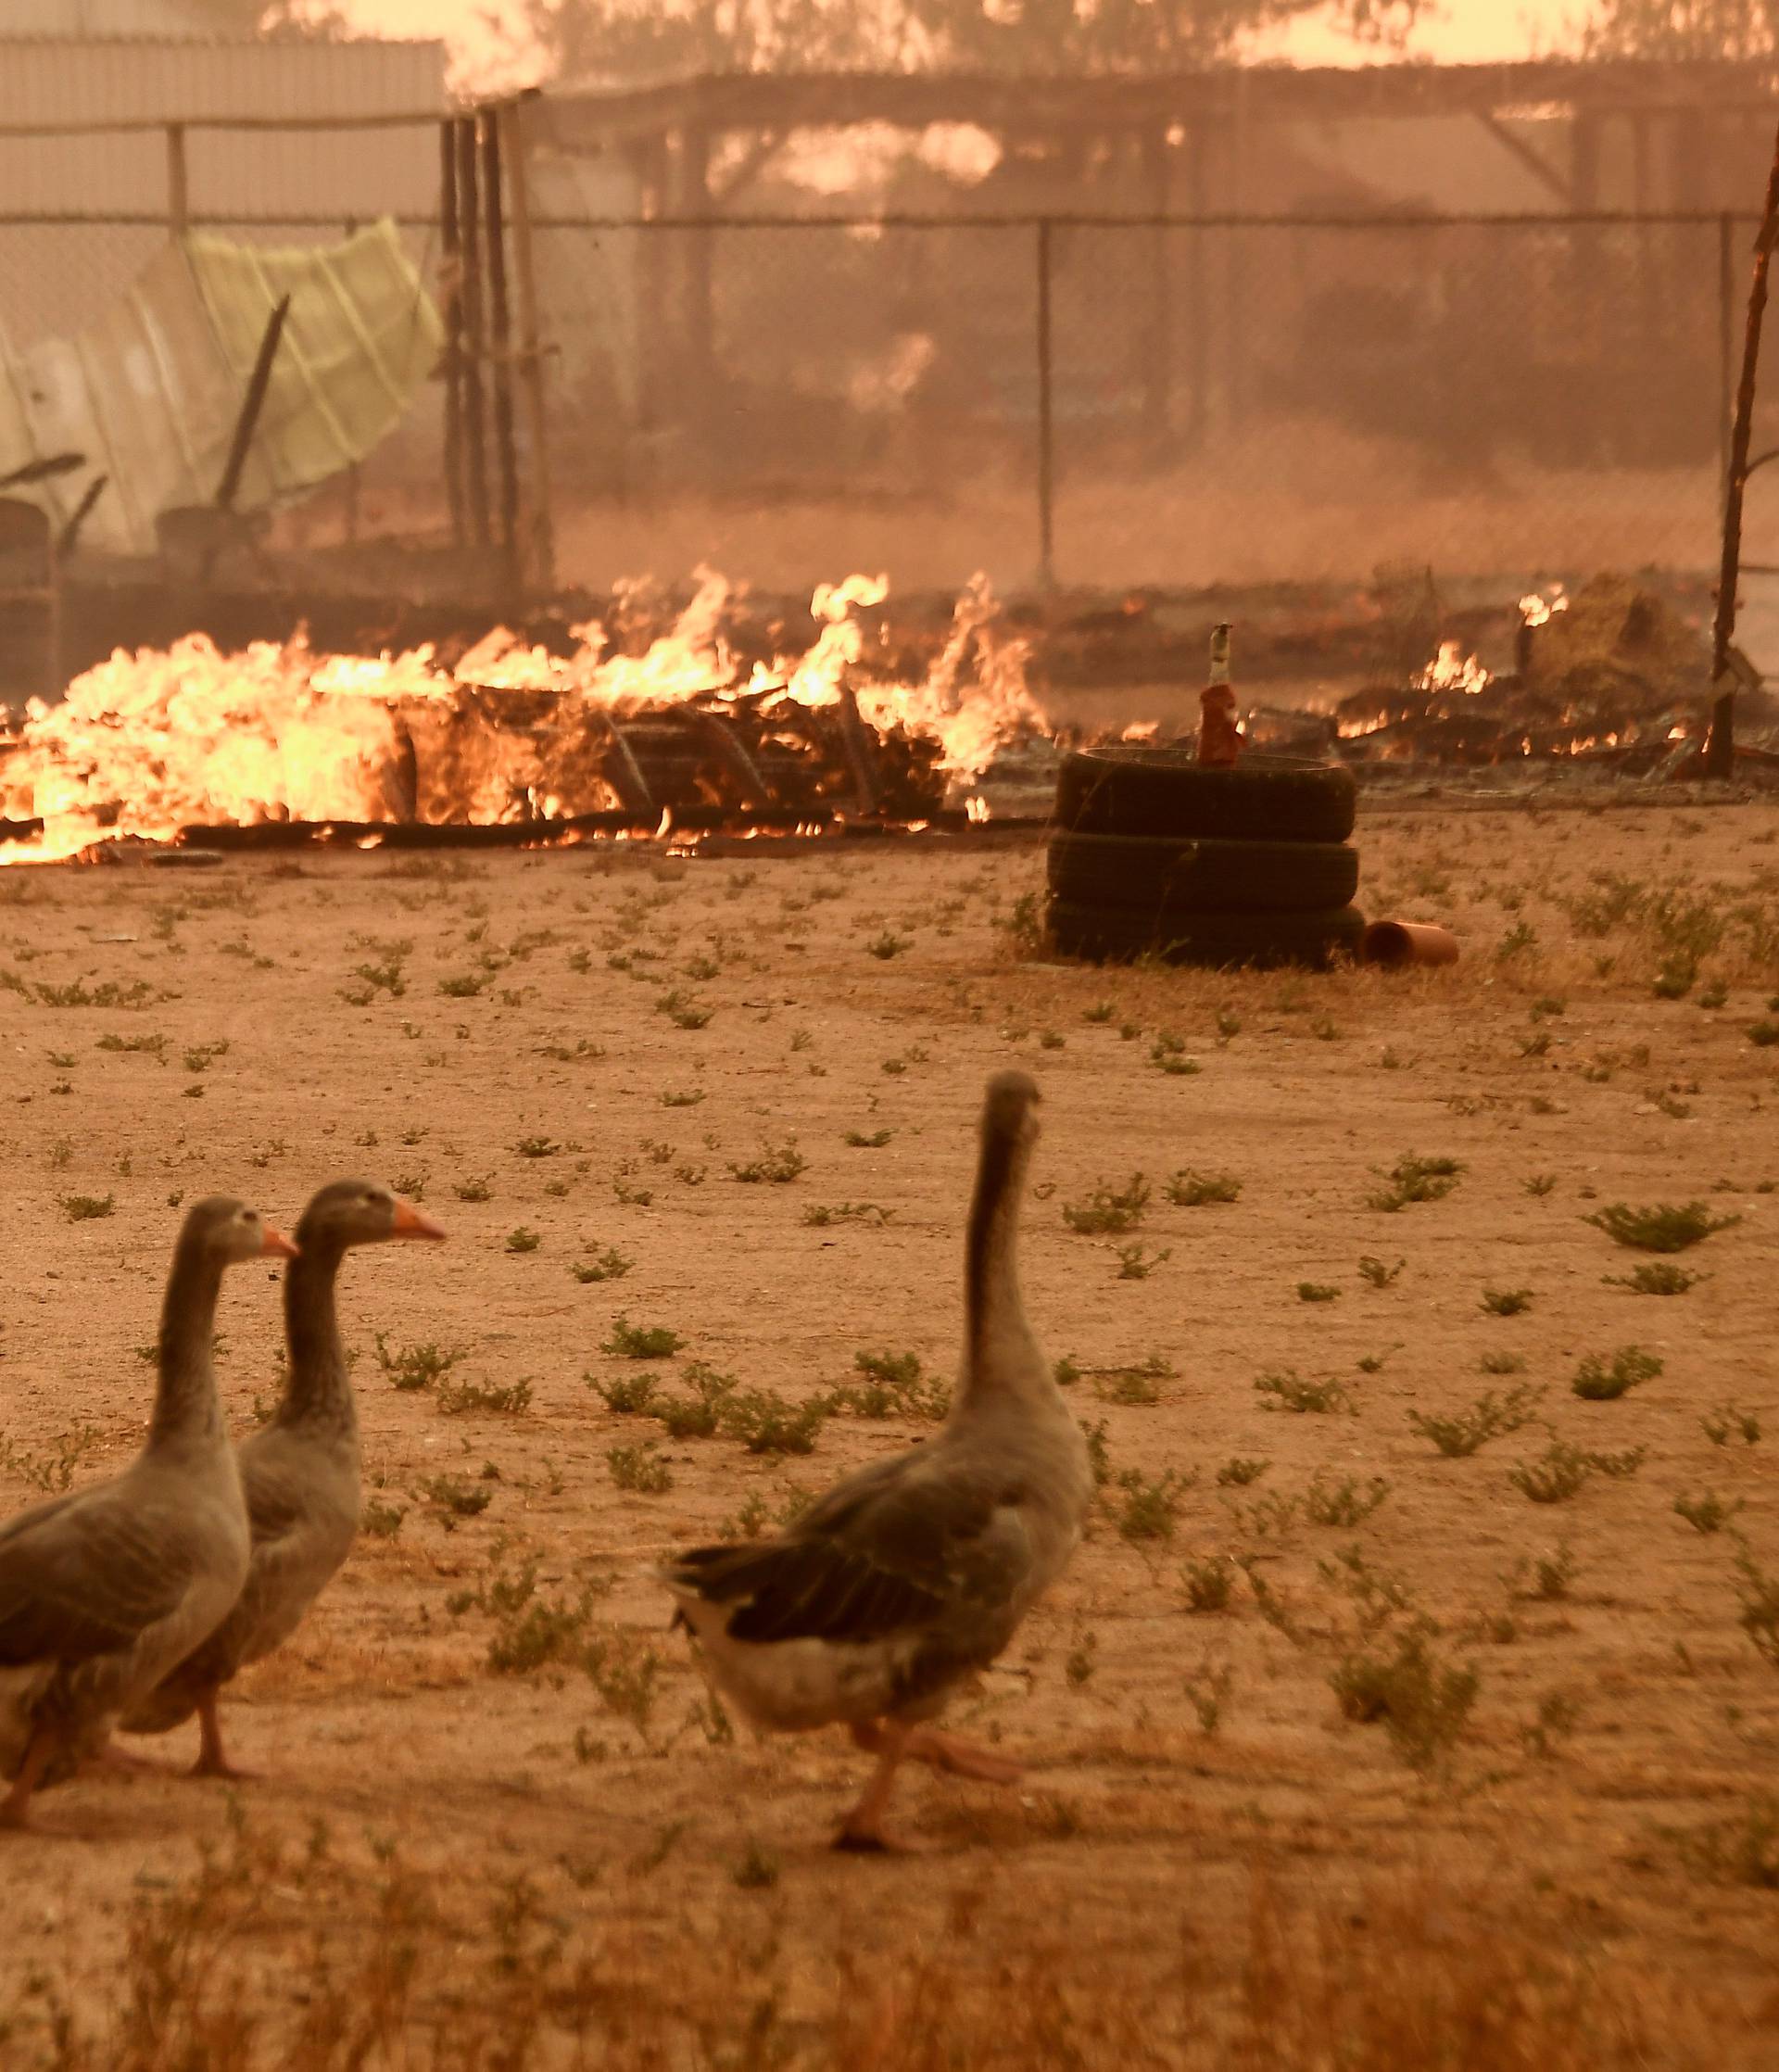 Geese walk past a chicken coop that burned with animals inside at the so-called Bluecut Fire in San Bernardino County, California